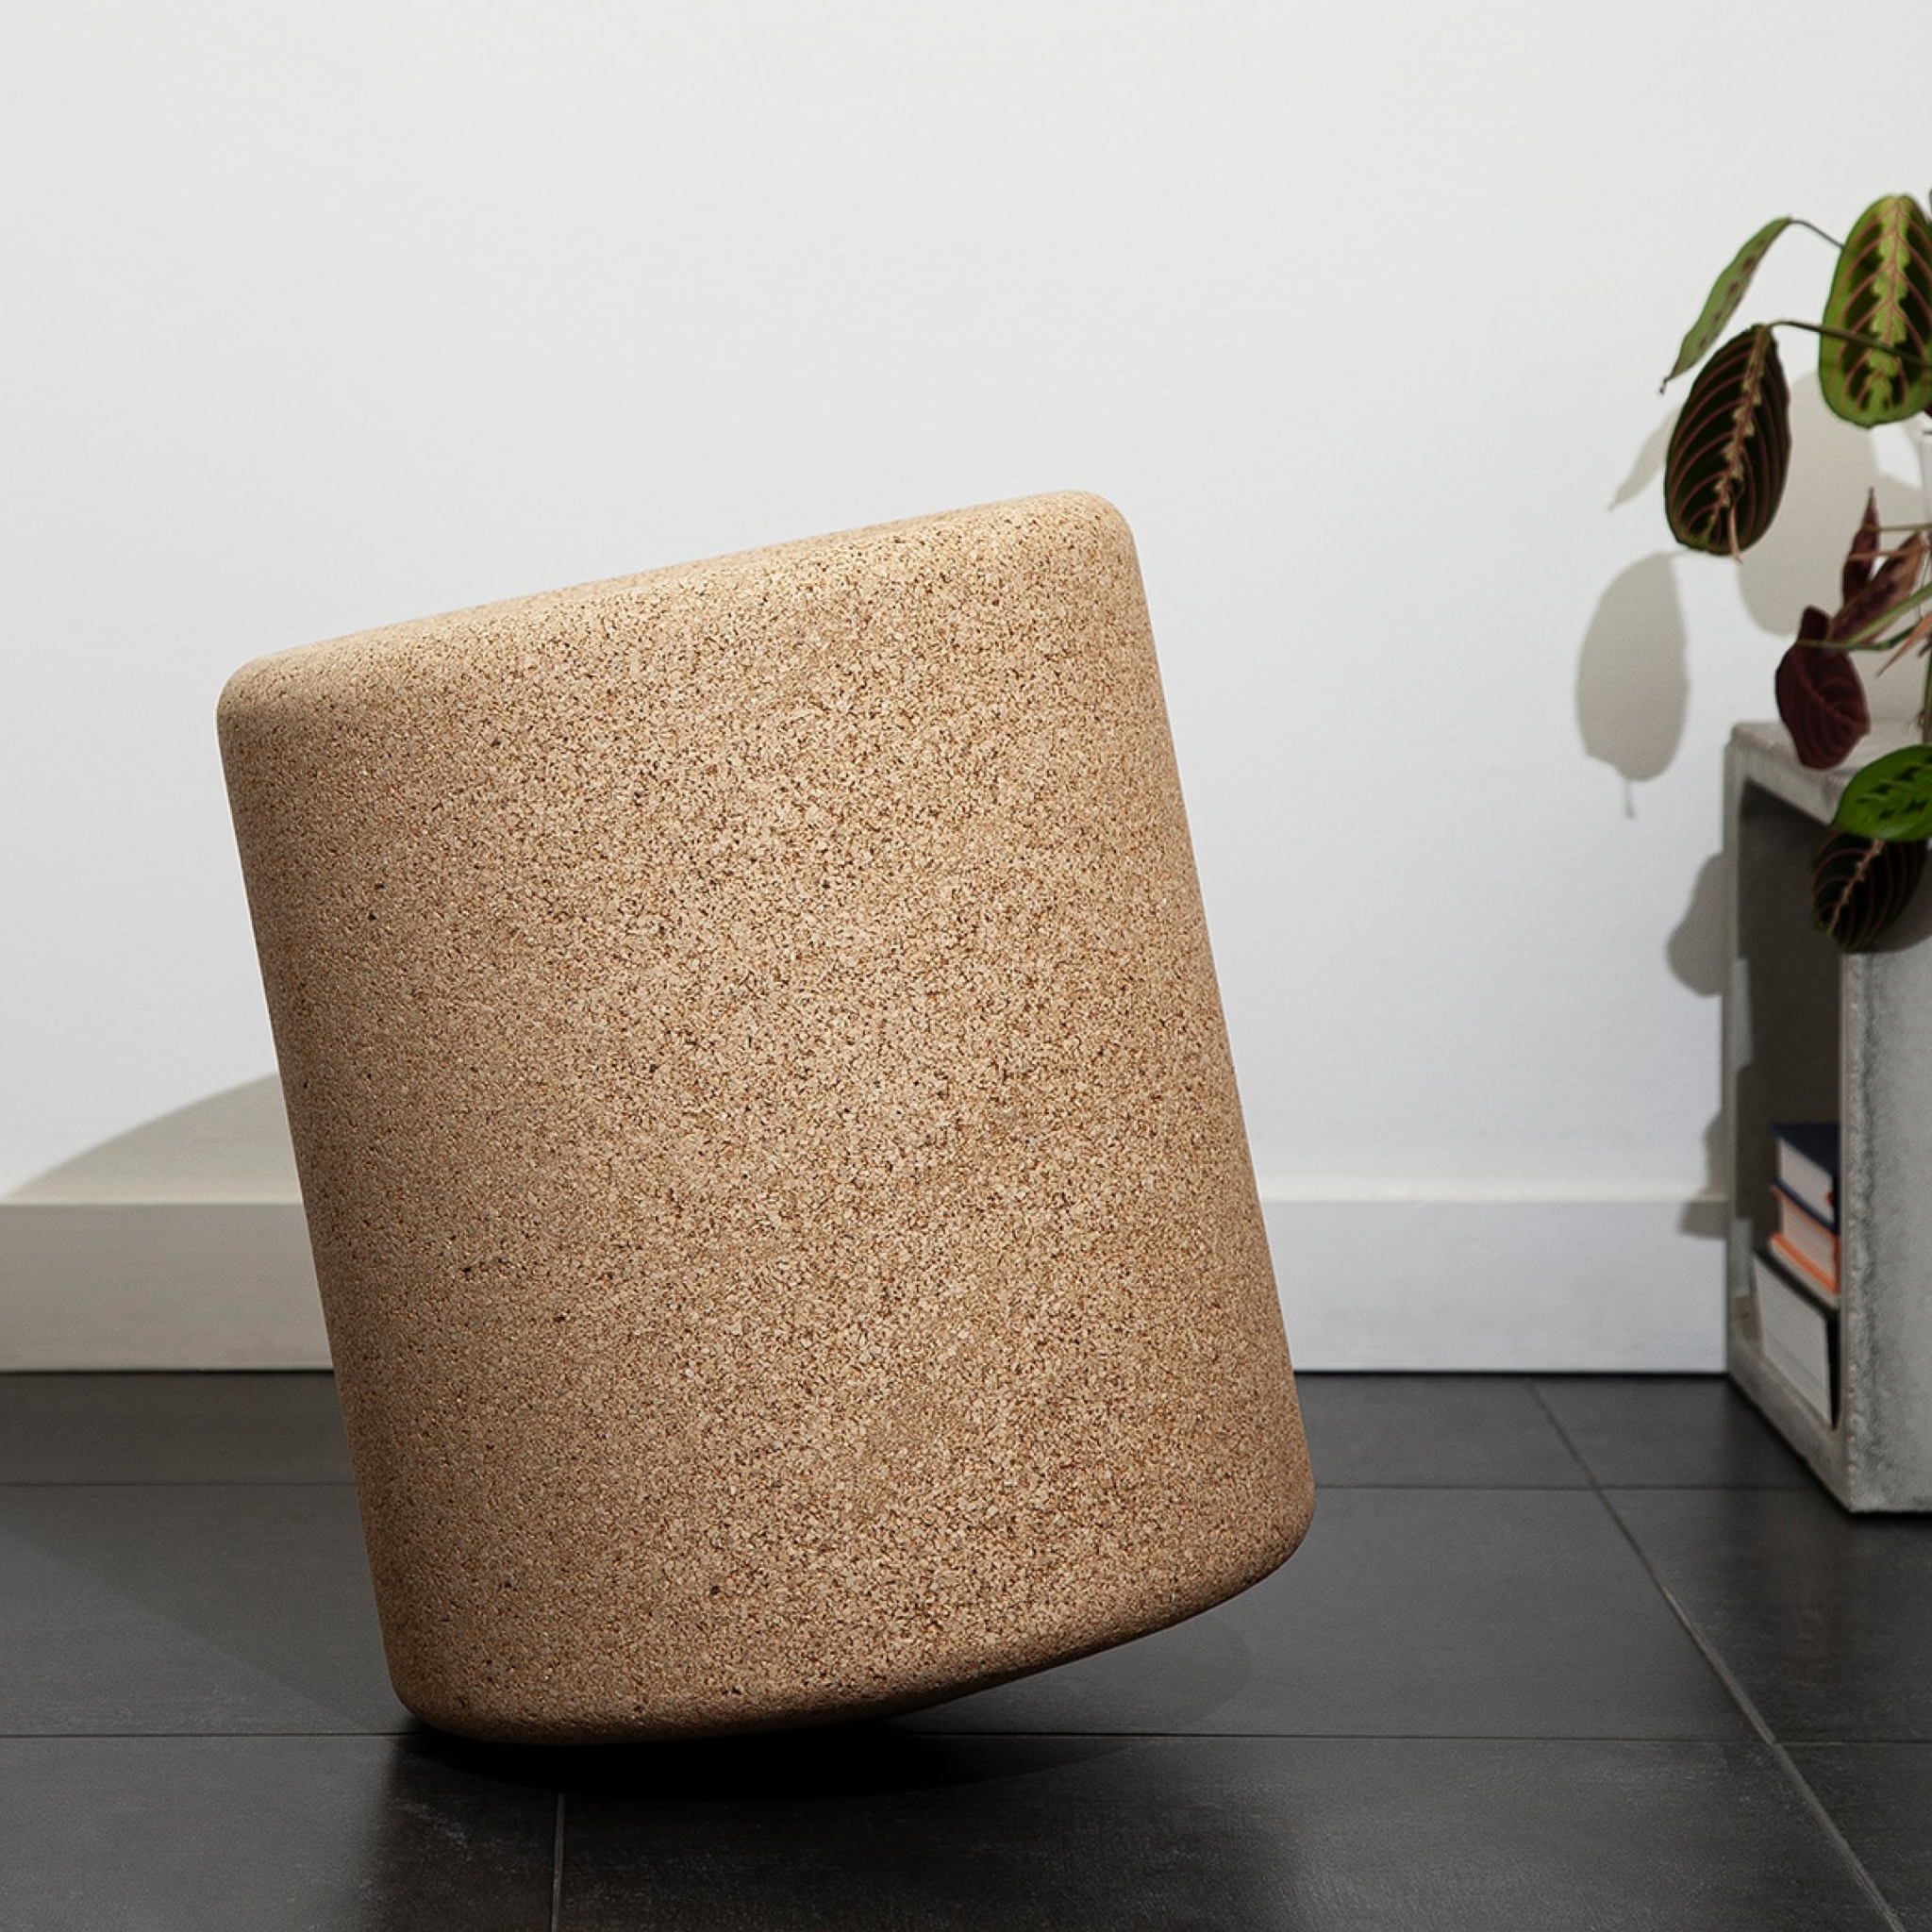 YLINCORK STOOL by MS